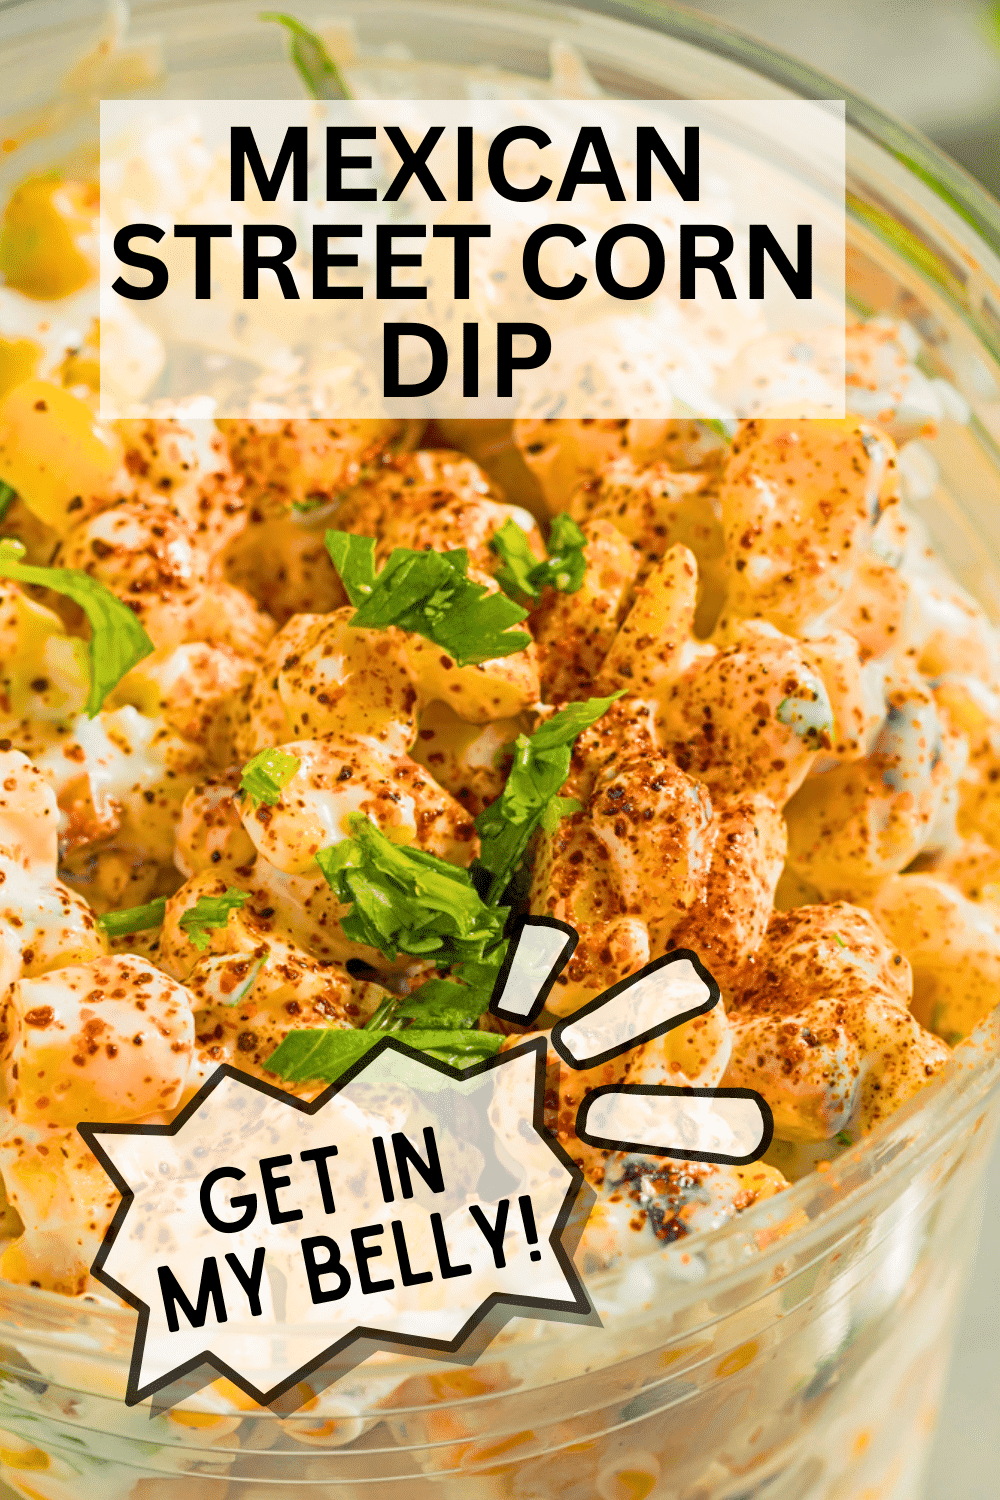 Get In My Belly Mexican Street Corn Dip (BEST MEXICAN FOOD RECIPES!) text over street corn in a cup